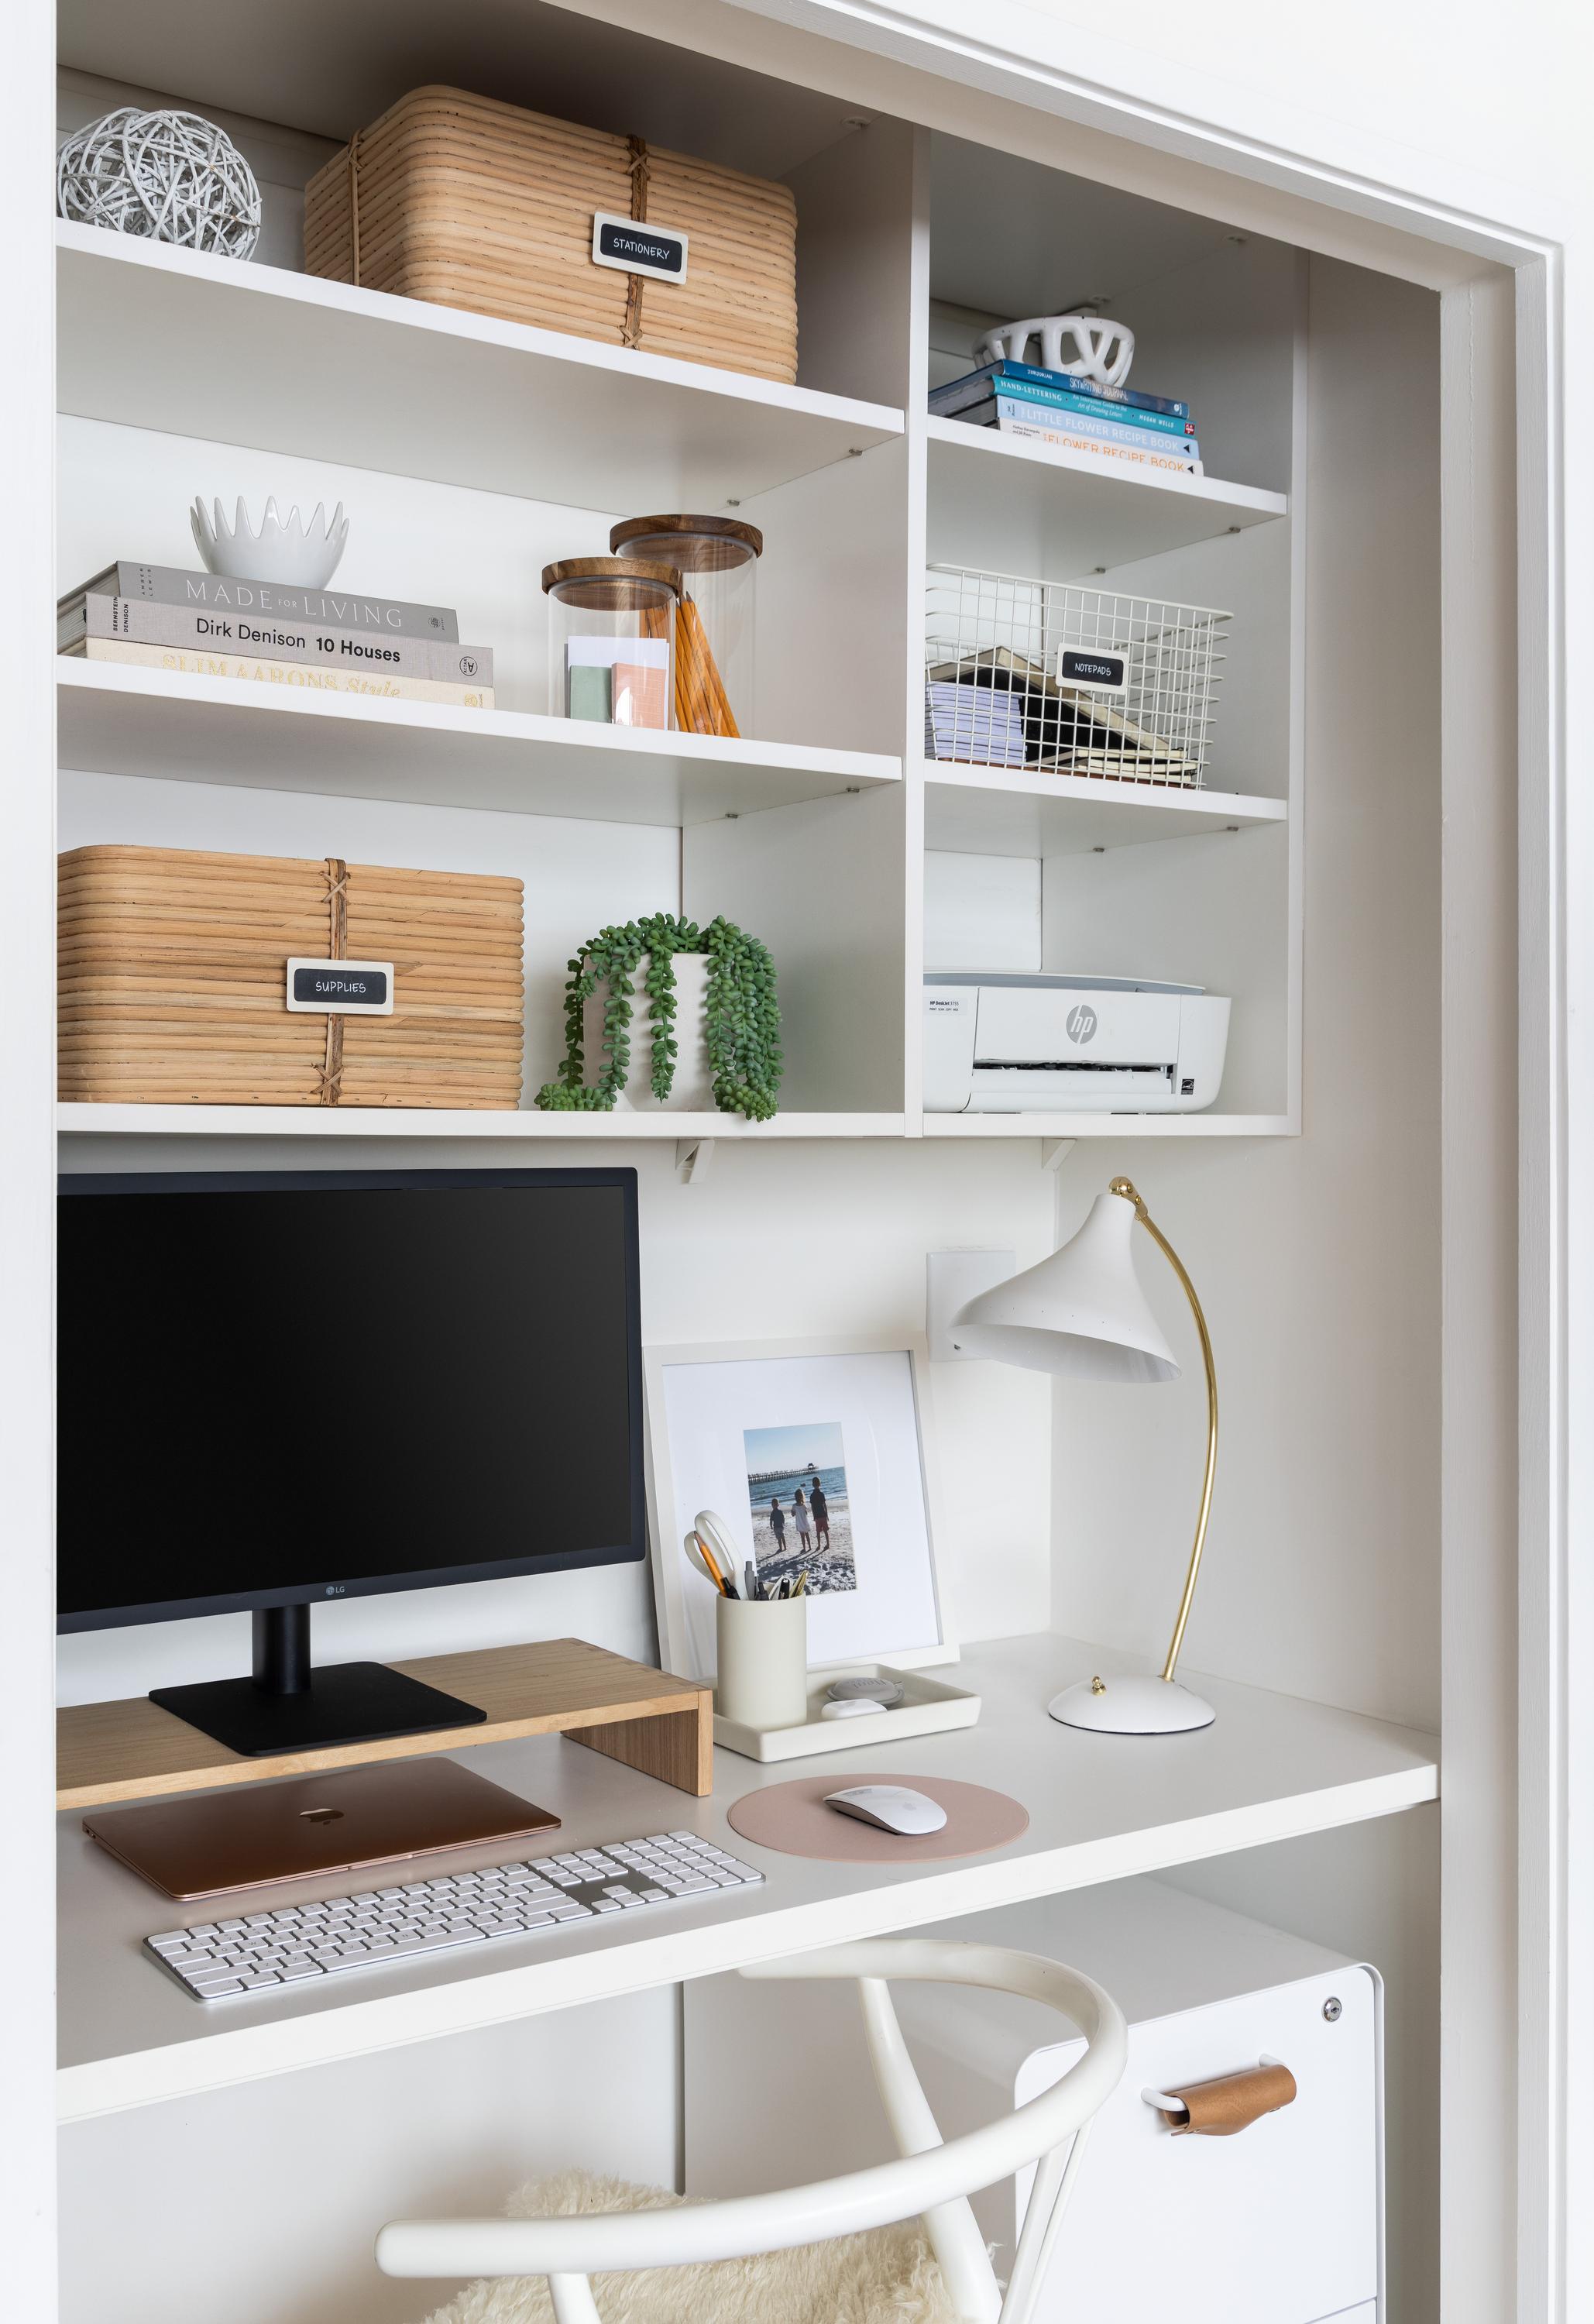 6 Sustainable Tips for Getting and Staying Organized